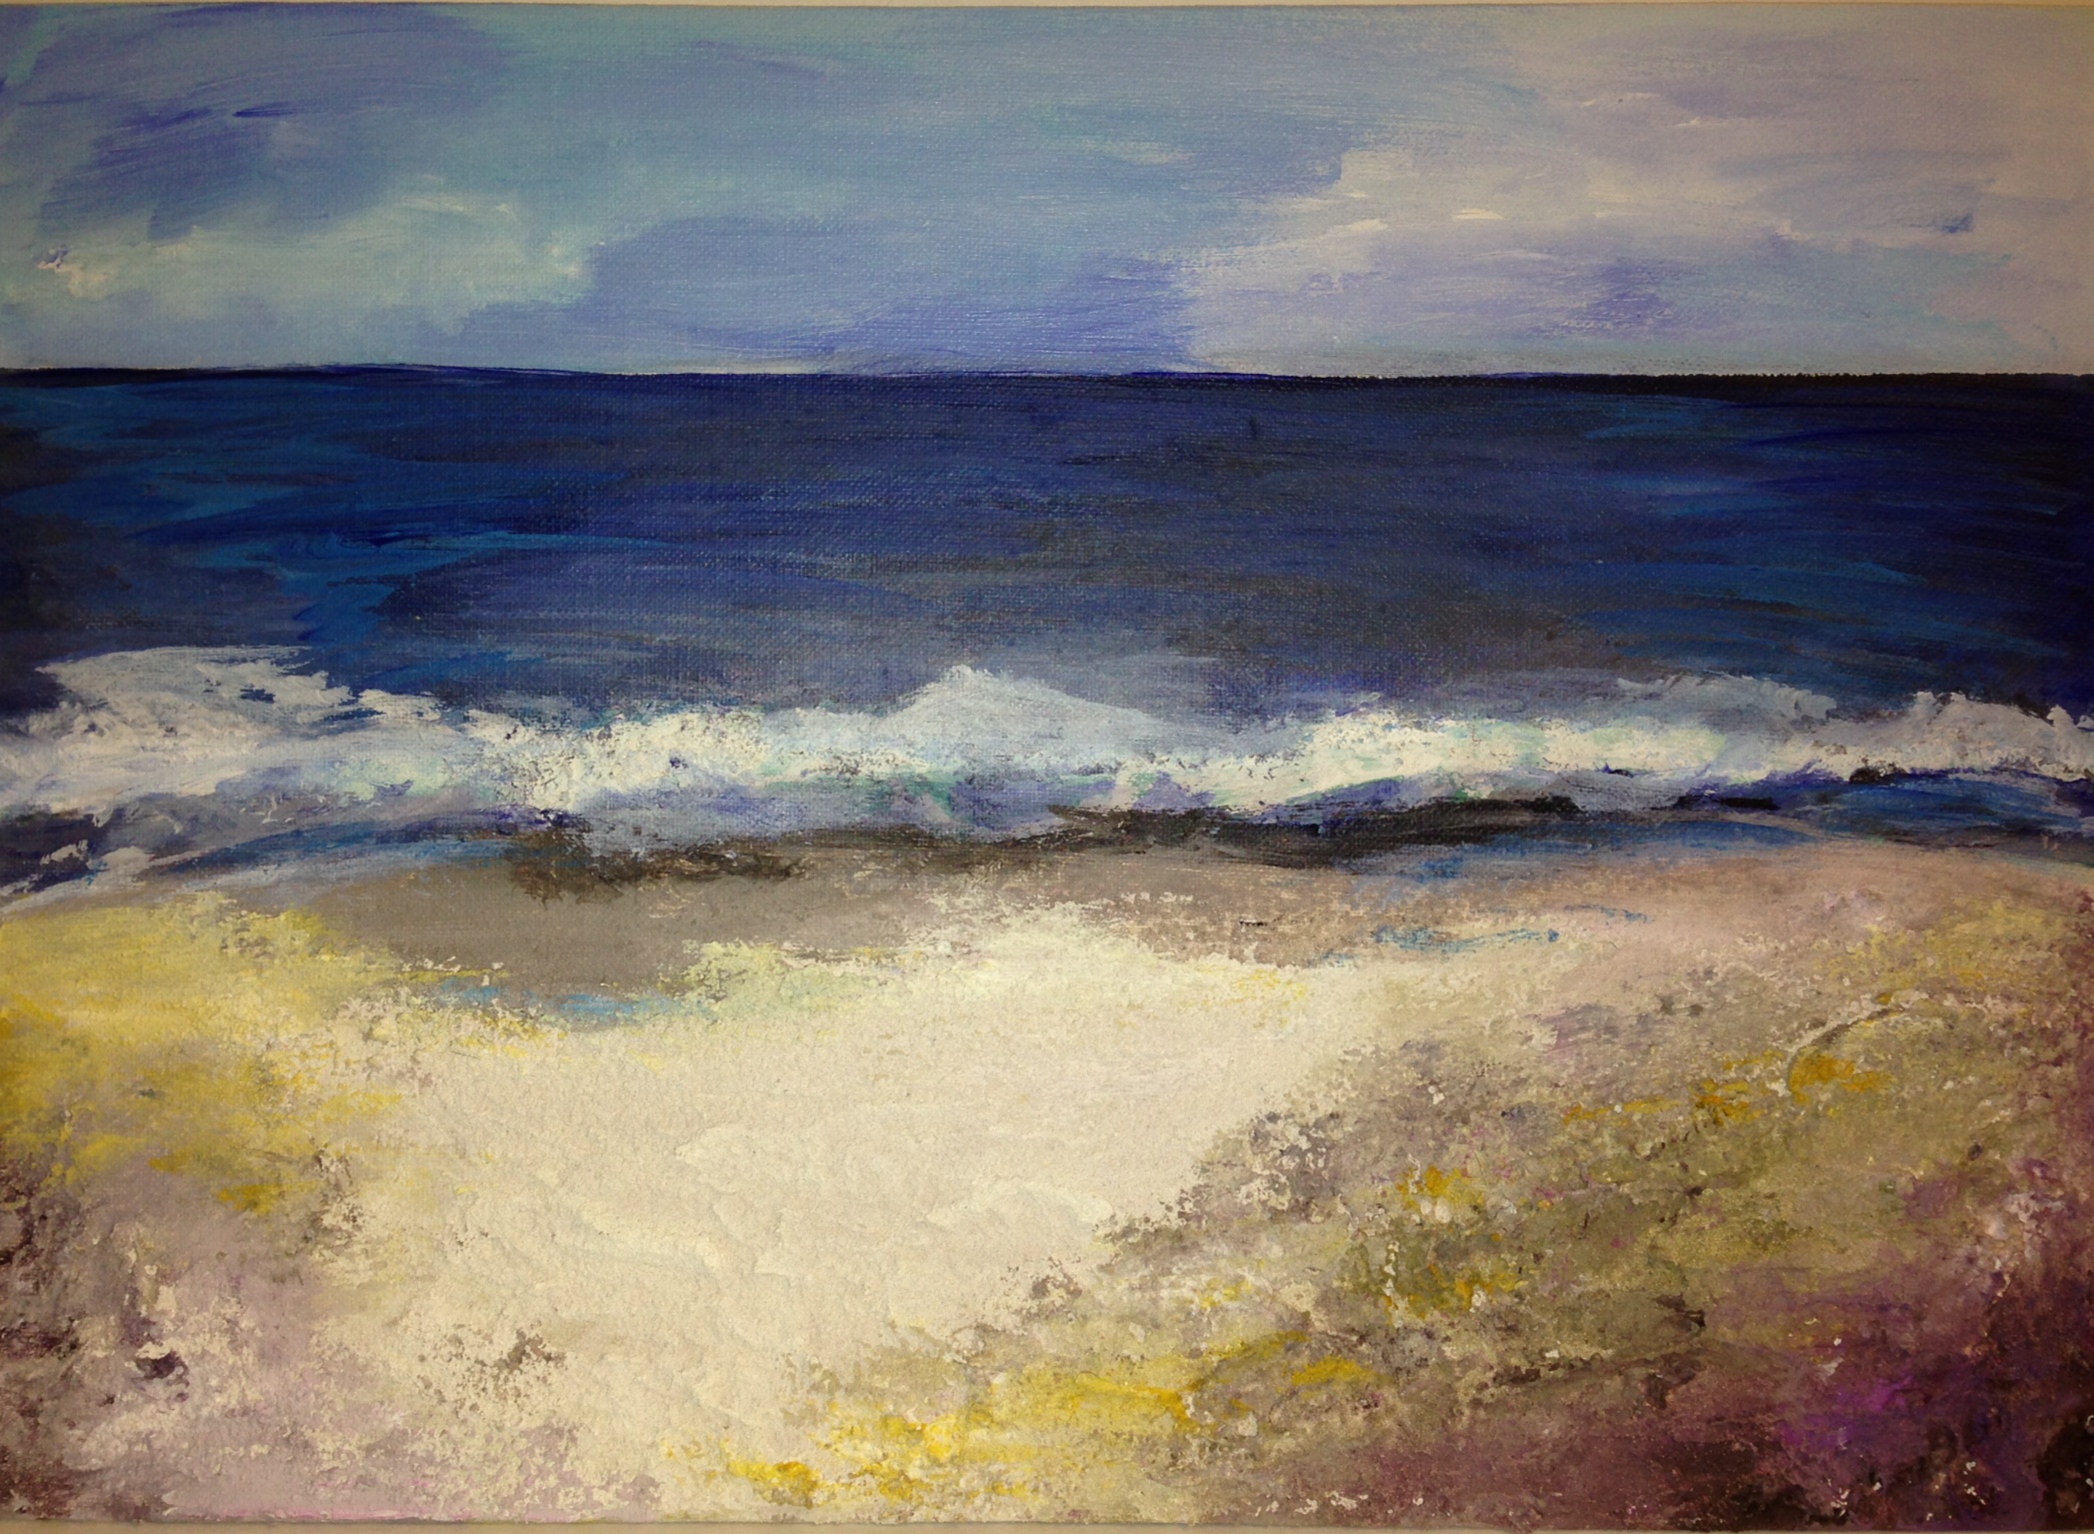 Painting of waves crashing on the beach